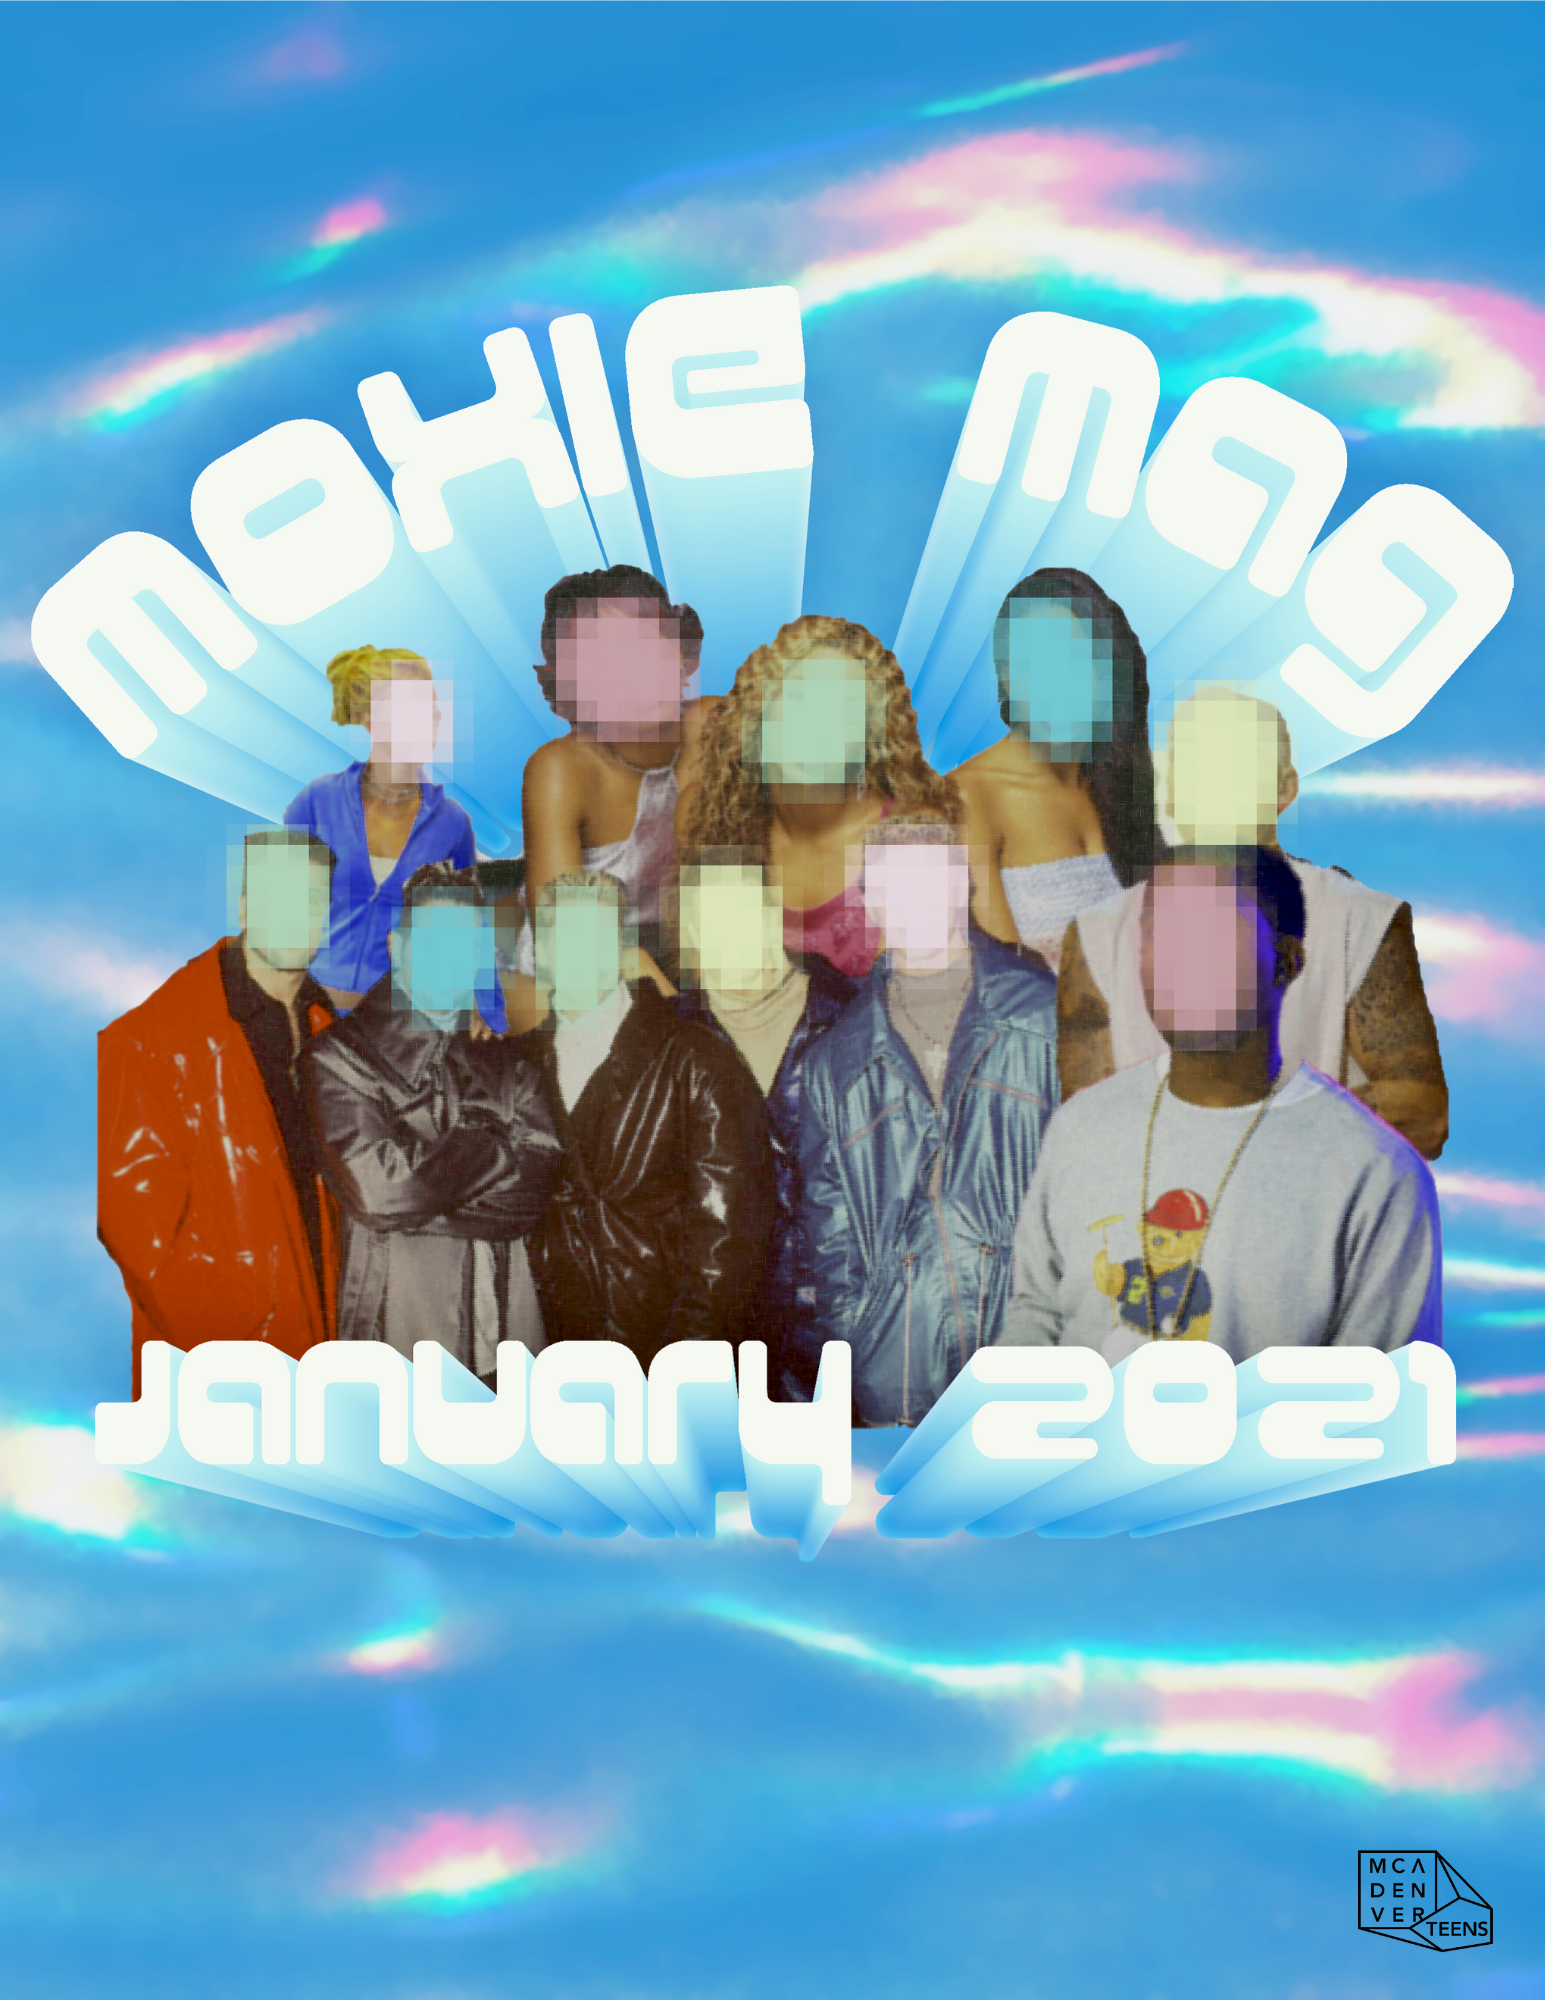 A retro yet futuristic blue, pink, and white cover of MCA Denver teens January issue of MoxieMag. Congregated in the middle of the page is a group of people with their faces blurred, clad in early 2000’s outfits. Above the group of people is the text “Moxie Mag” and underneath them reads “January, 2021”. The font is a soft white and has a three dimensional quality to it with a shadow text effect.